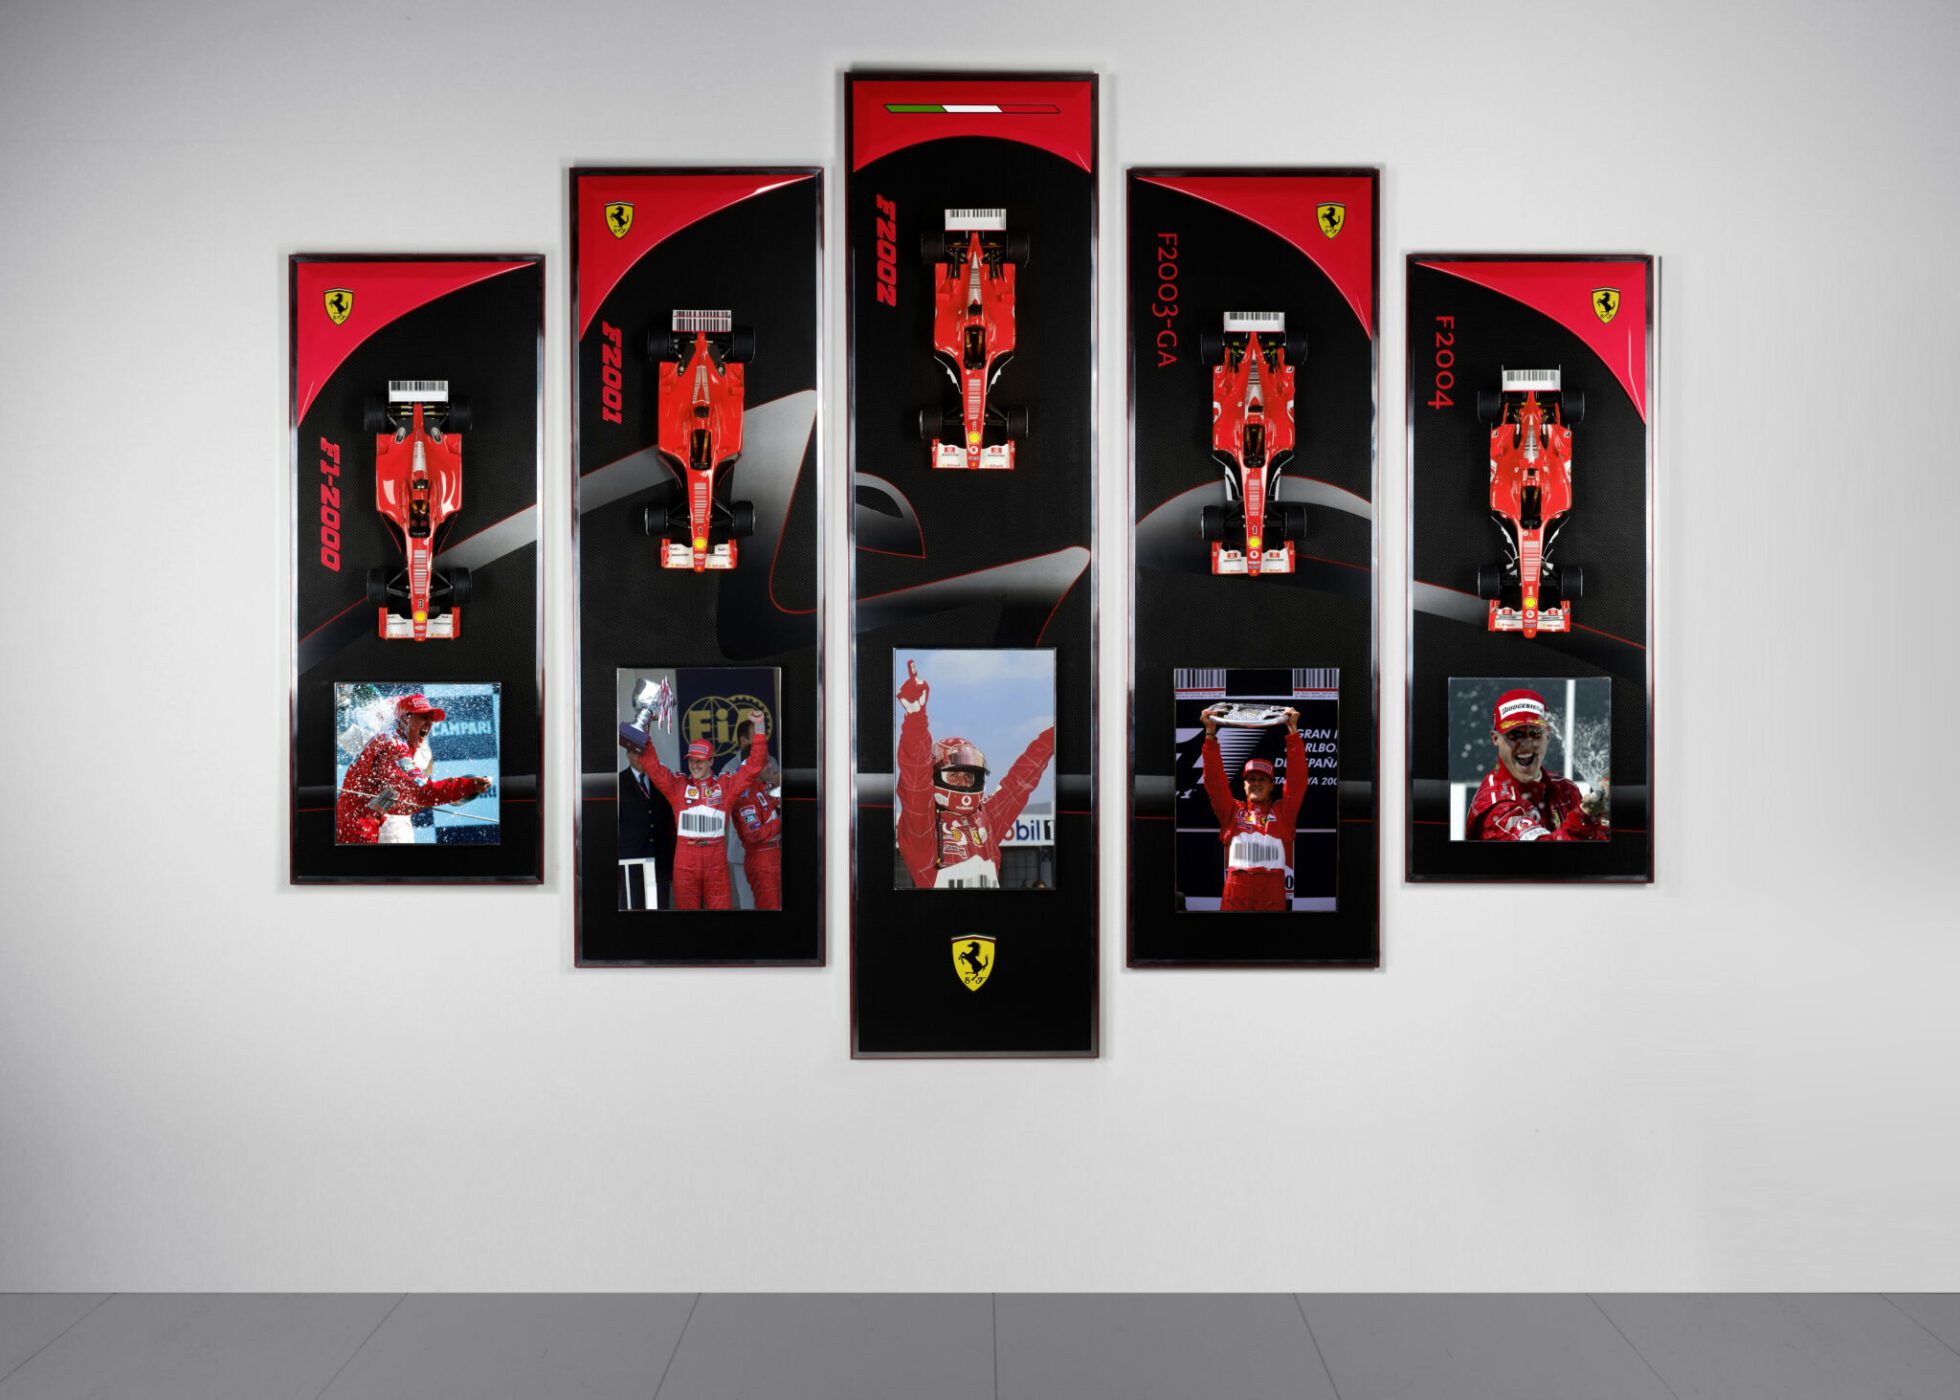 The Schumacher Collection Special Wall Mounted Limited Edition (6)